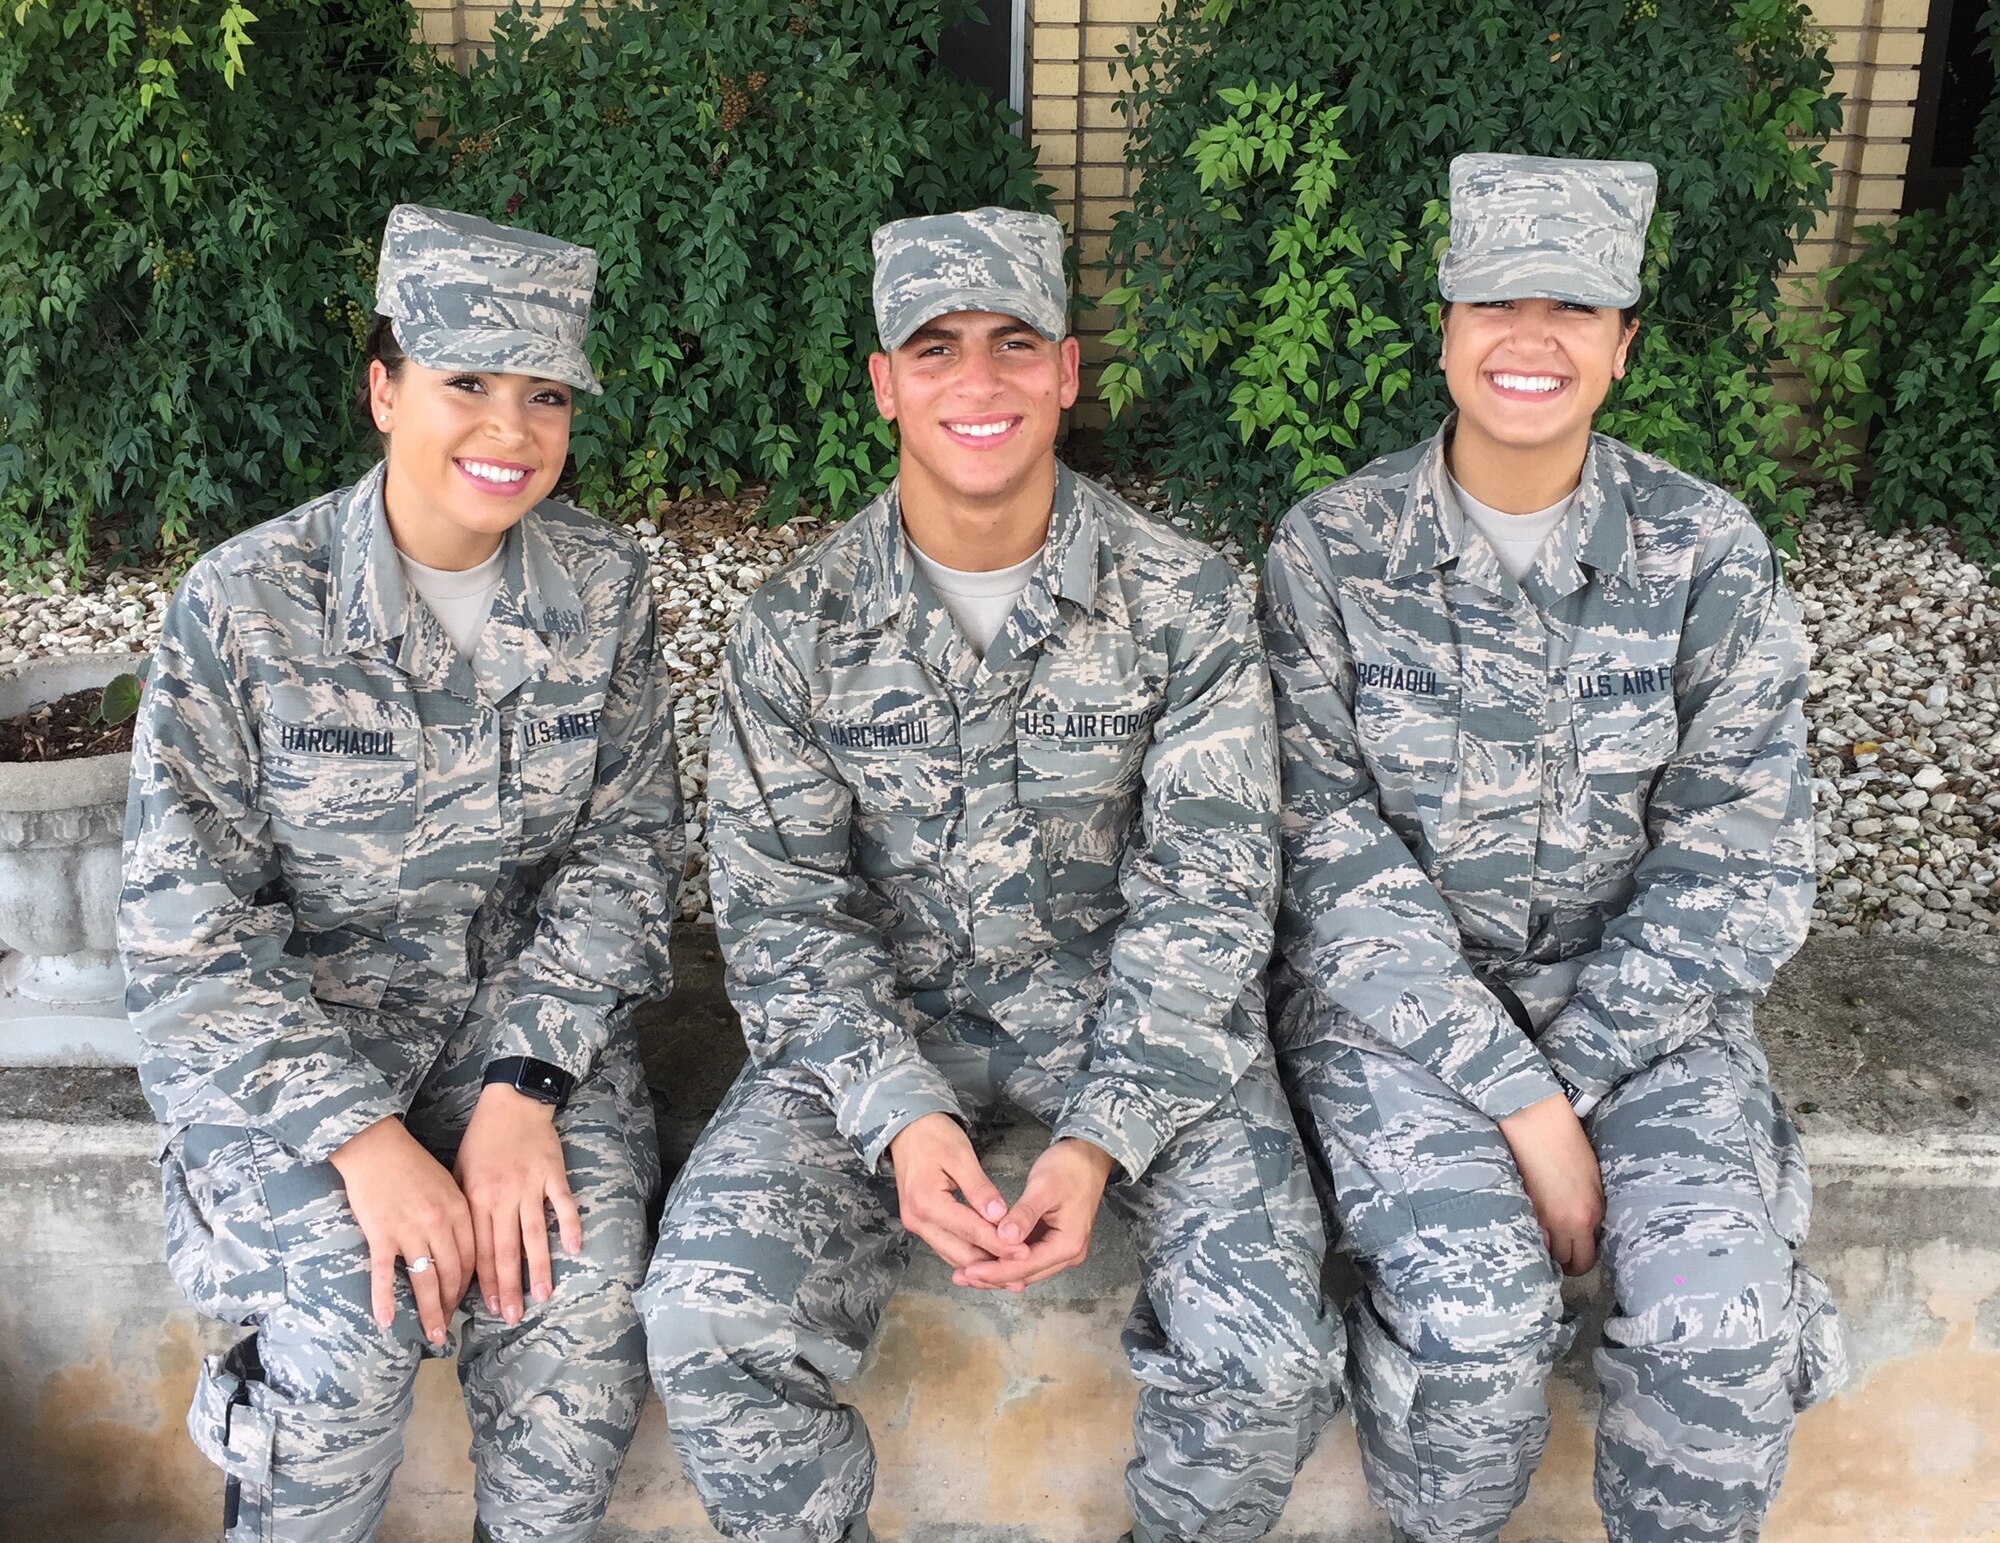 Pictured are the Harchaoui triplets (from left): Myriam, 436th Supply Chain Operations Squadron at Scott Air Force Base, Ill.; Rabah, 56th Security Forces Squadron at Luke AFB, Ariz.; and Warda, 60th Medical Operations Squadron at Travis AFB, Calif. All three were born in Algeria before immigrating to the United States, and are Airmen serving in today’s Air Force. (Courtesy photo)